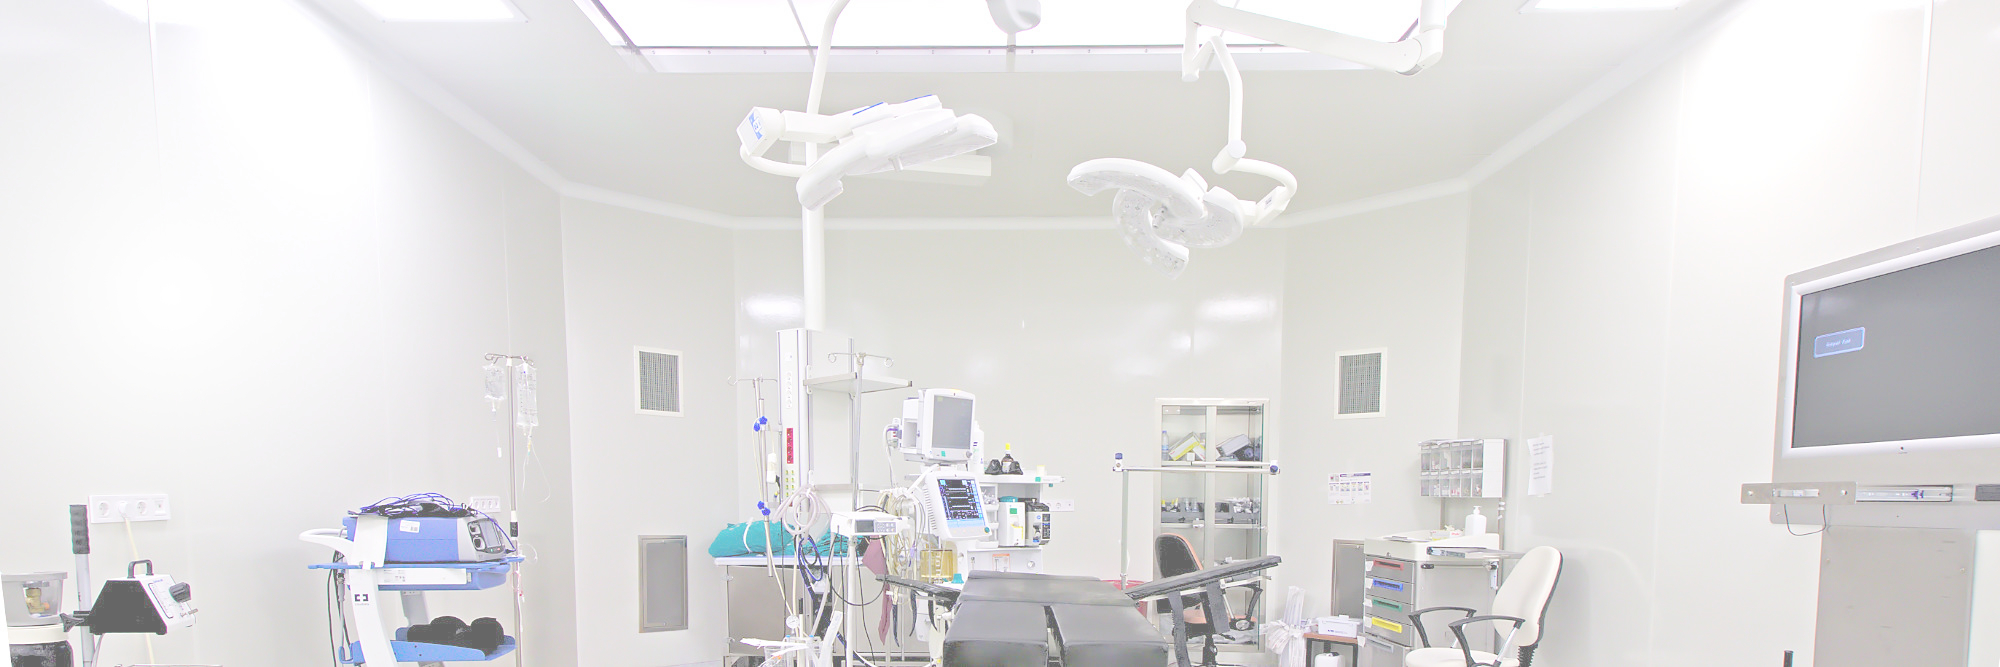 Decopan Medical GRP laminates for wall and ceiling use in medical facilities